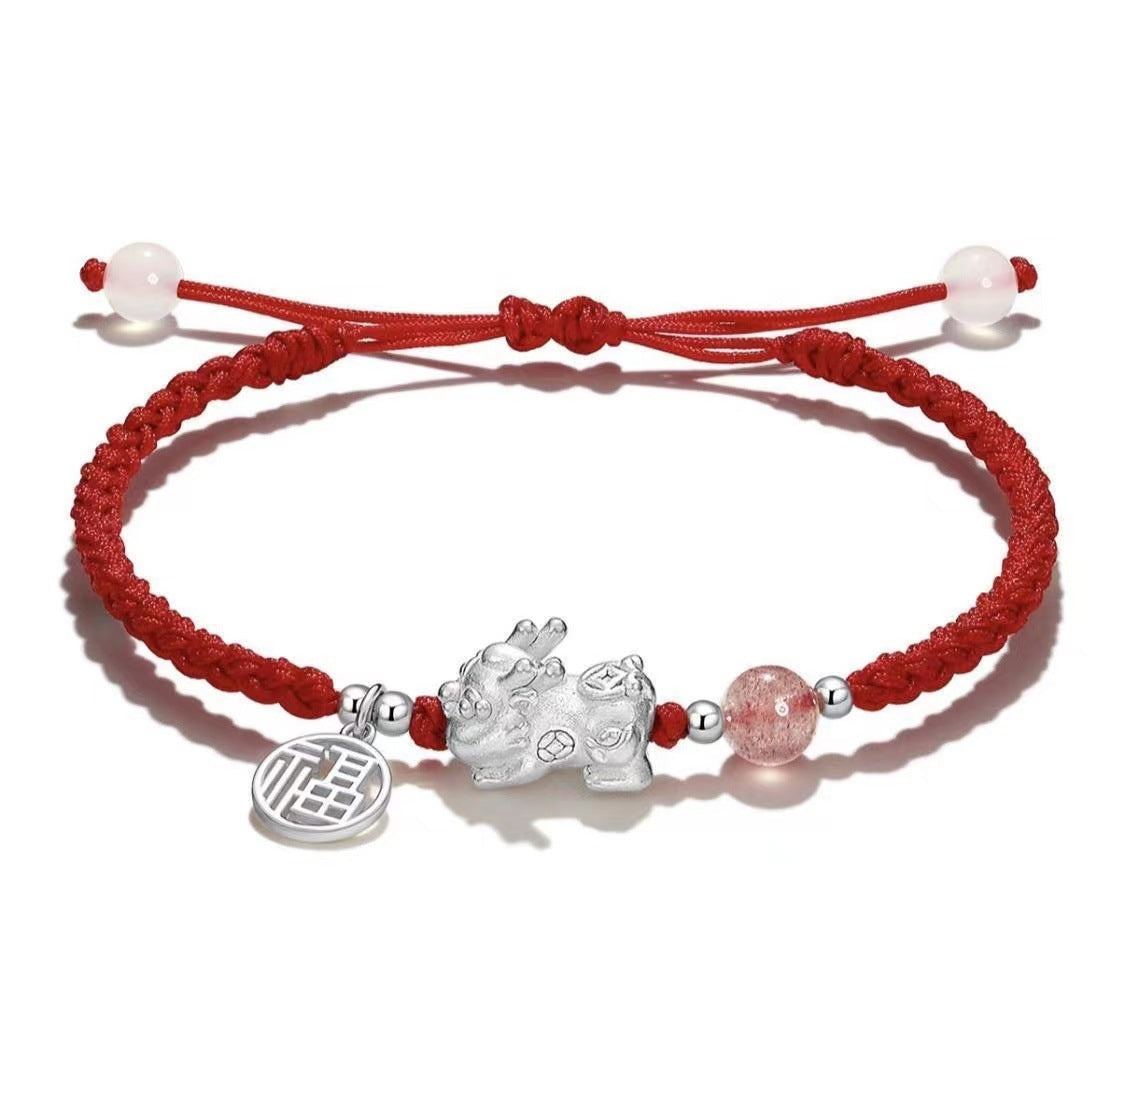 Hand-Woven Copper-Silver-Plated Red Rope Bracelets with Gold-Swallowing Beasts for Valentine's Day